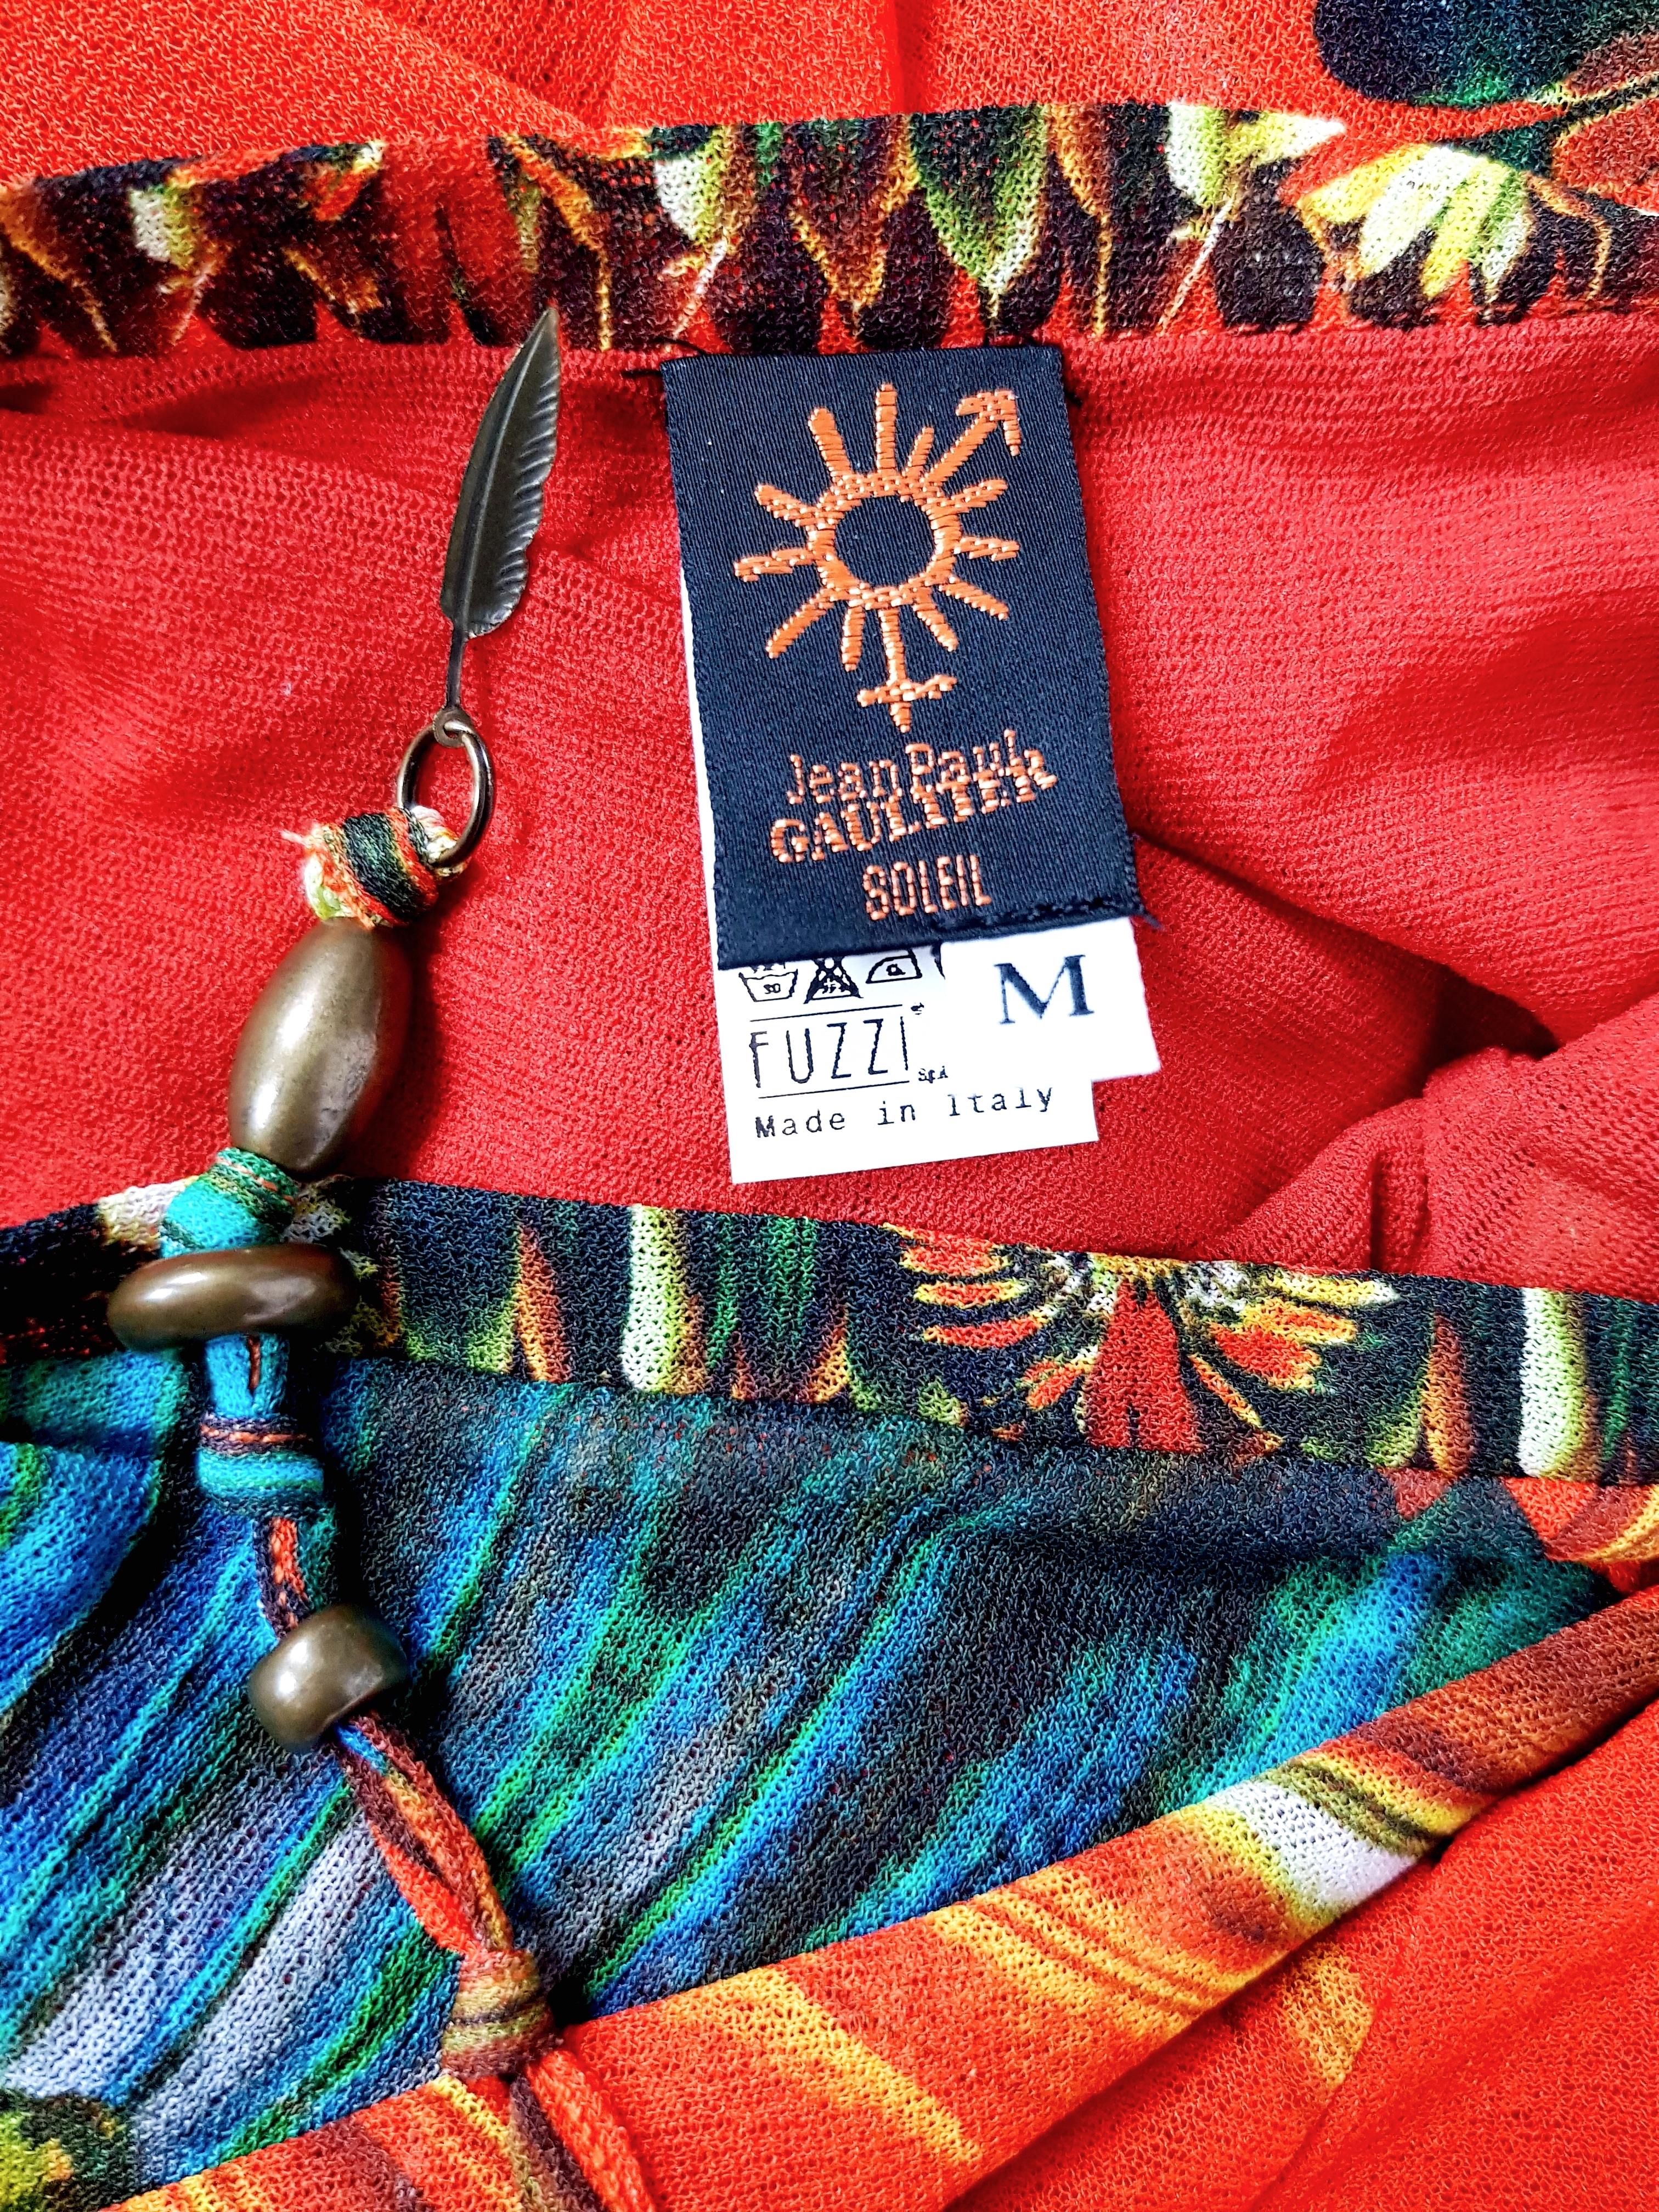 Wonderful JEAN PAUL GAULTIER vintage multicolored feather/exotic print maxi dress featuring a red fabric panel across the chest (made with generous fabric, very wide).
Uber flattering, lightweight, stretchy mesh fabric and self tie halter neckline